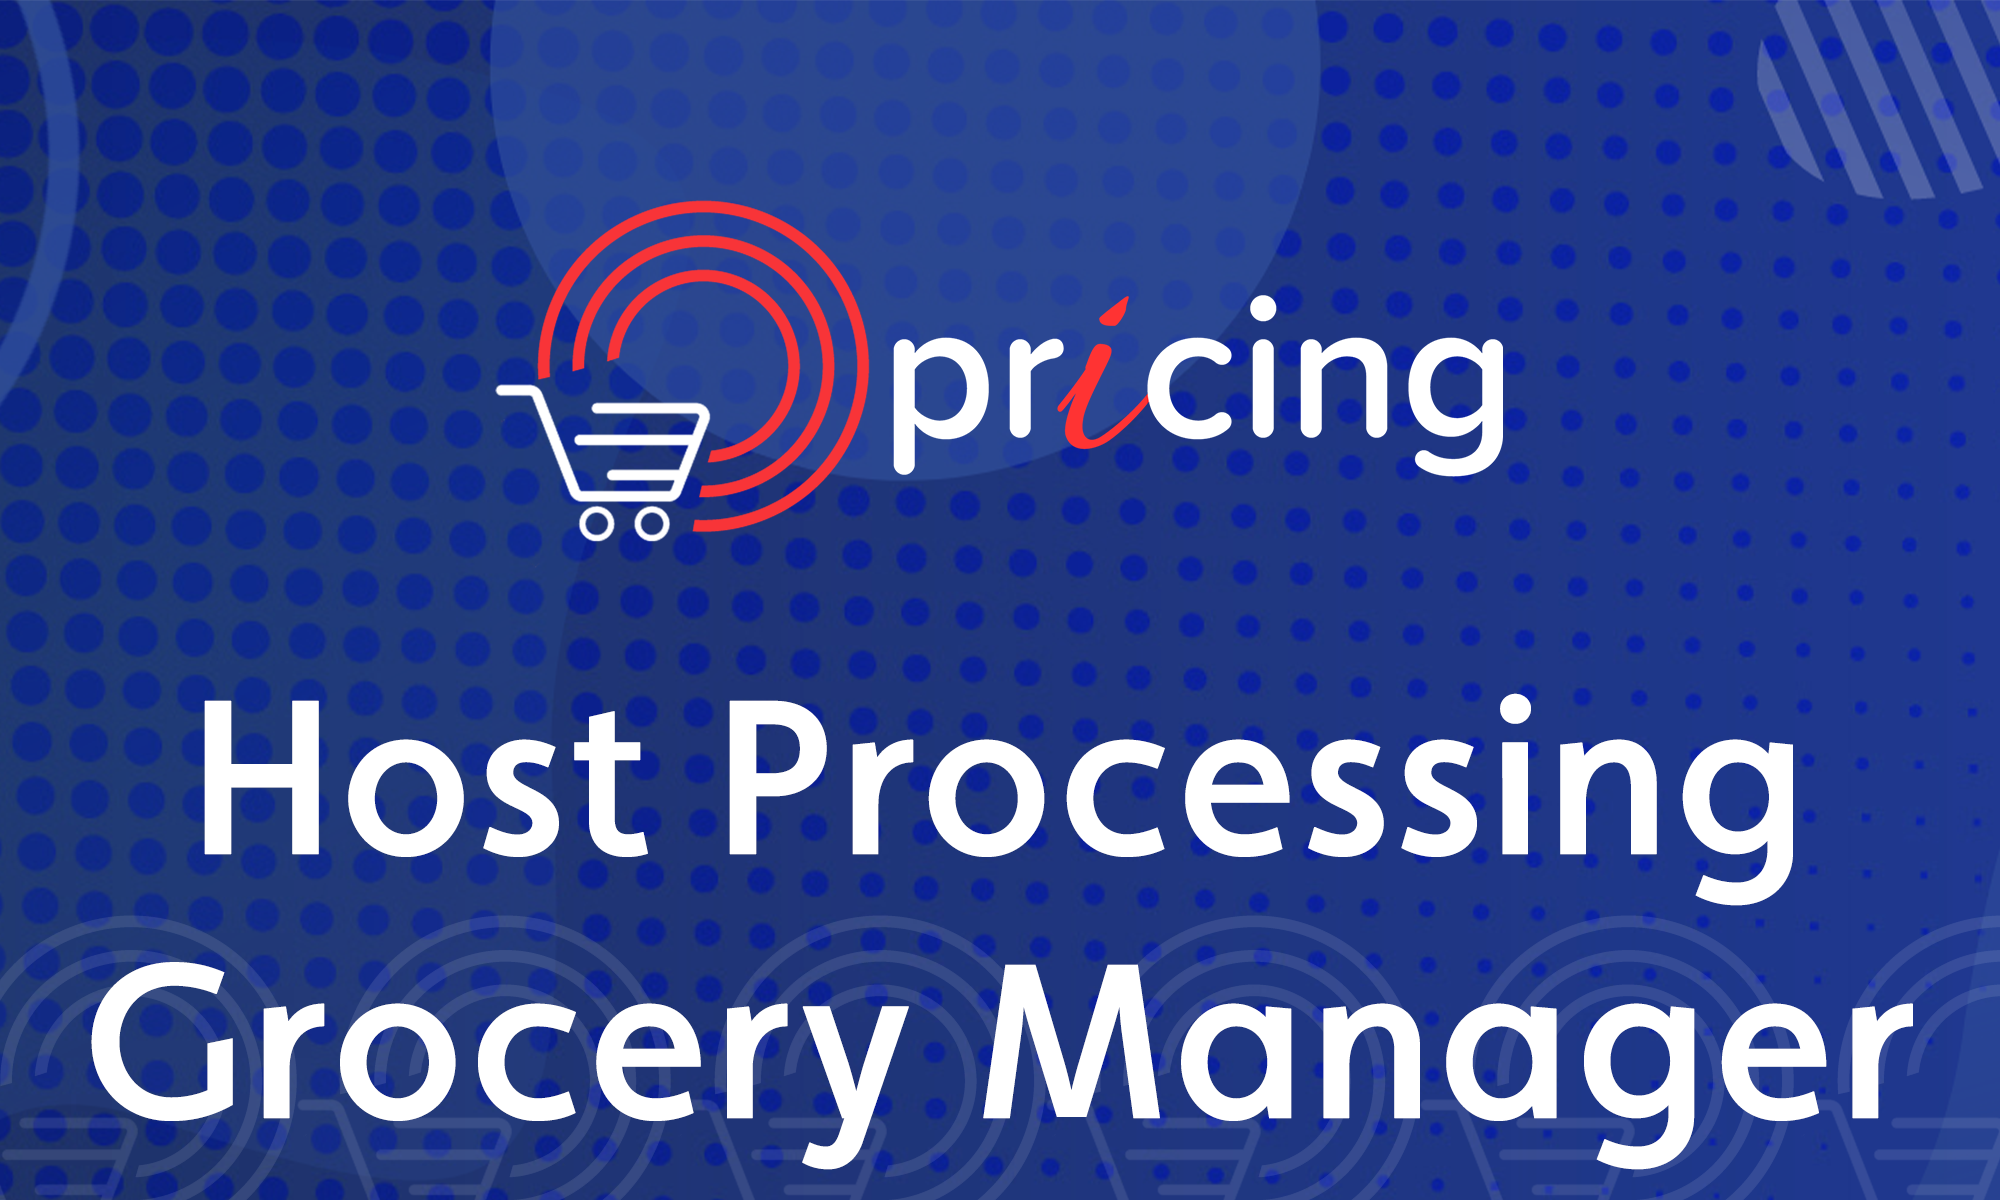 Featured image for “Grocery Manager Host Processing”